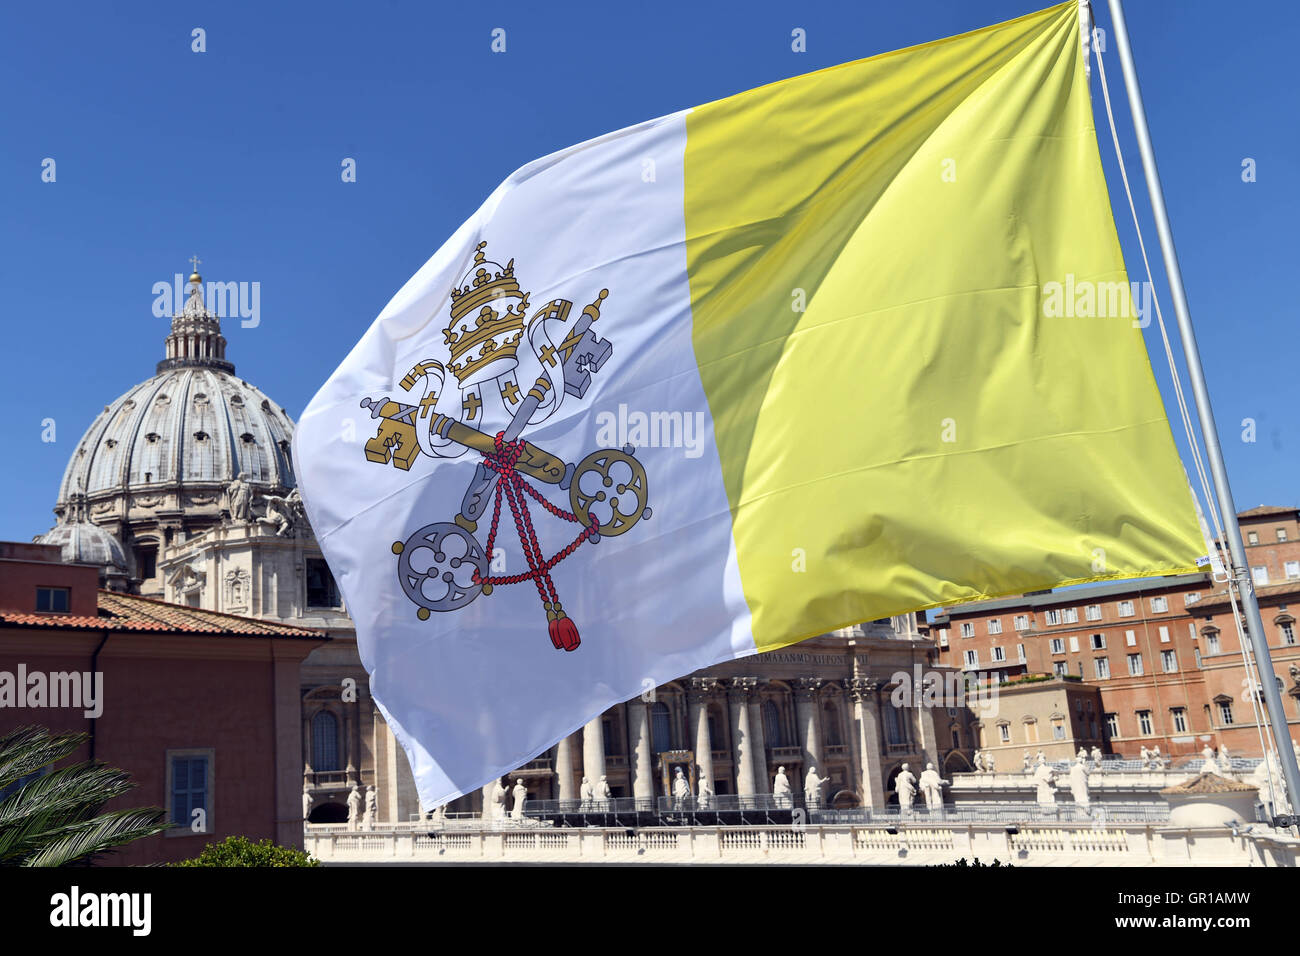 A flag with the coat of arms of Vatican City waves in Vatican City, 02 September 2016. St. Peter's Basilica can be seen in the background. Photo: ULI DECK/dpa Stock Photo